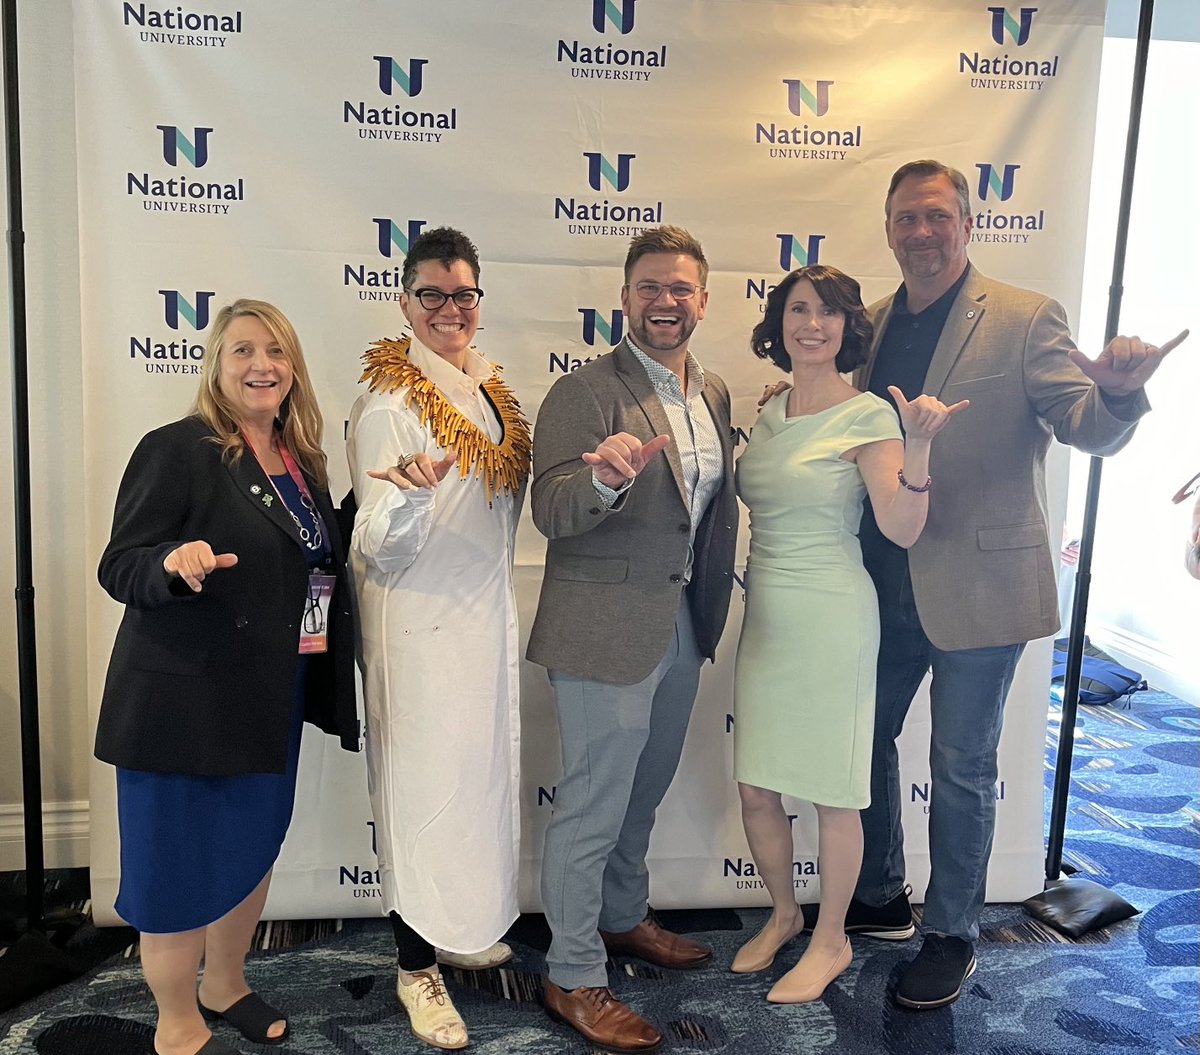 ⁦@NatUniv⁩ had a strong delegation led by President ⁦@markmilliron⁩ involved at the ⁦@asugsvsummit⁩. NU had an impressive array of presentations and panels on pressing topics for higher ed and K-12. Special thanks to ⁦@harmony_sel⁩.